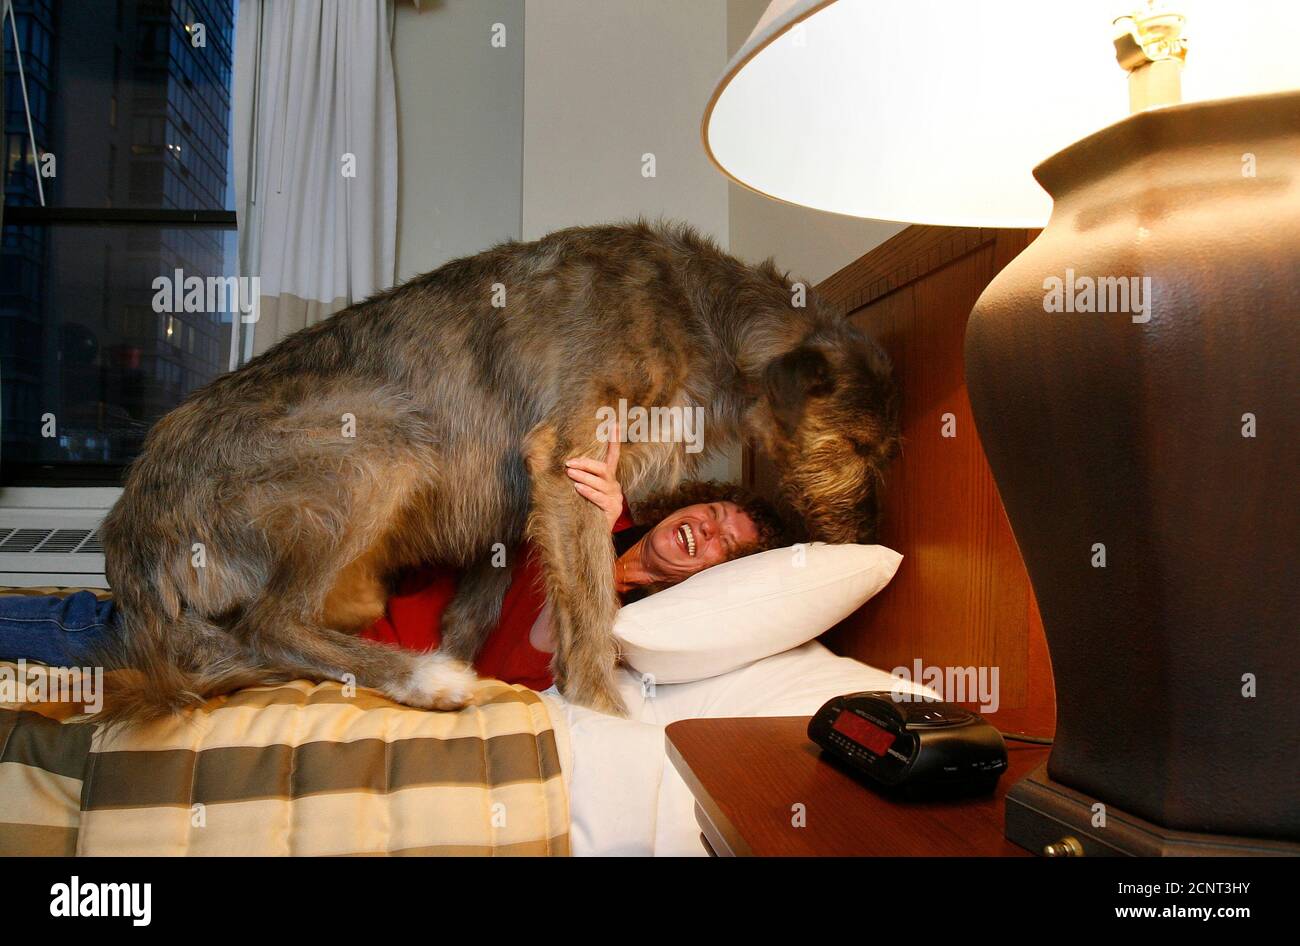 Dakota, an Irish Wolfhound, jumps on the bed of Susan Doersam at the Hotel Pennsylvania in New York February 9, 2008. Dakota is taking part in the Westminster Kennel Club Dog Show, which begins next week. REUTERS/Carlo Allegri  (UNITED STATES) Stock Photo